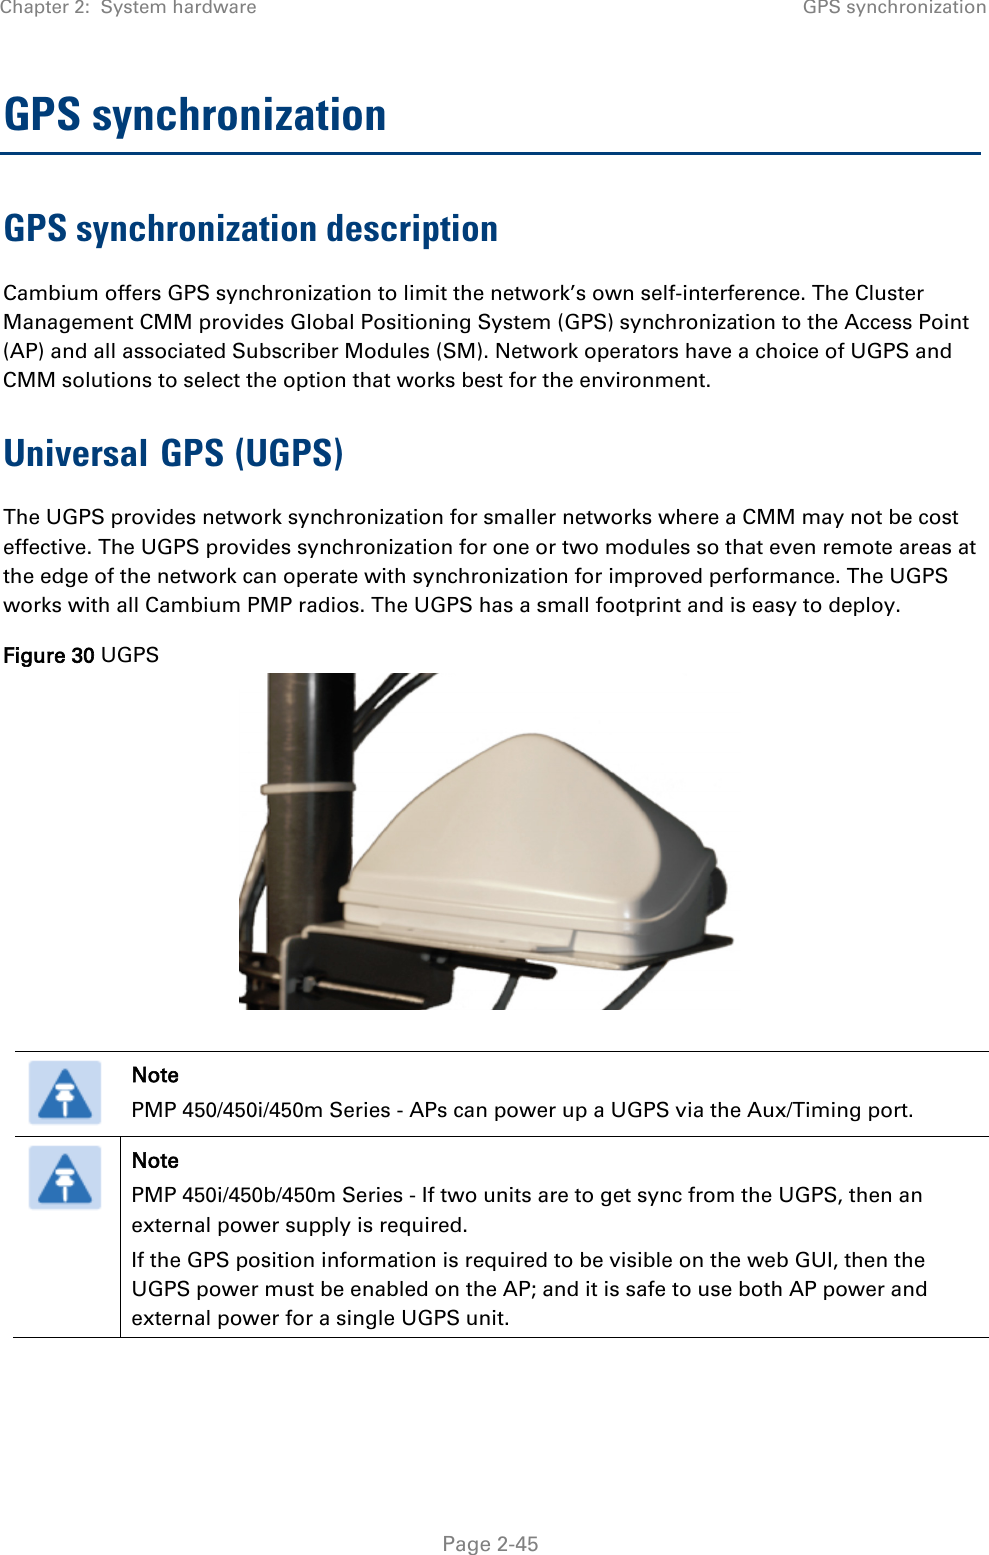 Chapter 2:  System hardware GPS synchronization   Page 2-45 GPS synchronization GPS synchronization description Cambium offers GPS synchronization to limit the network’s own self-interference. The Cluster Management CMM provides Global Positioning System (GPS) synchronization to the Access Point (AP) and all associated Subscriber Modules (SM). Network operators have a choice of UGPS and CMM solutions to select the option that works best for the environment. Universal GPS (UGPS) The UGPS provides network synchronization for smaller networks where a CMM may not be cost effective. The UGPS provides synchronization for one or two modules so that even remote areas at the edge of the network can operate with synchronization for improved performance. The UGPS works with all Cambium PMP radios. The UGPS has a small footprint and is easy to deploy. Figure 30 UGPS    Note PMP 450/450i/450m Series - APs can power up a UGPS via the Aux/Timing port.  Note PMP 450i/450b/450m Series - If two units are to get sync from the UGPS, then an external power supply is required.  If the GPS position information is required to be visible on the web GUI, then the UGPS power must be enabled on the AP; and it is safe to use both AP power and external power for a single UGPS unit.     